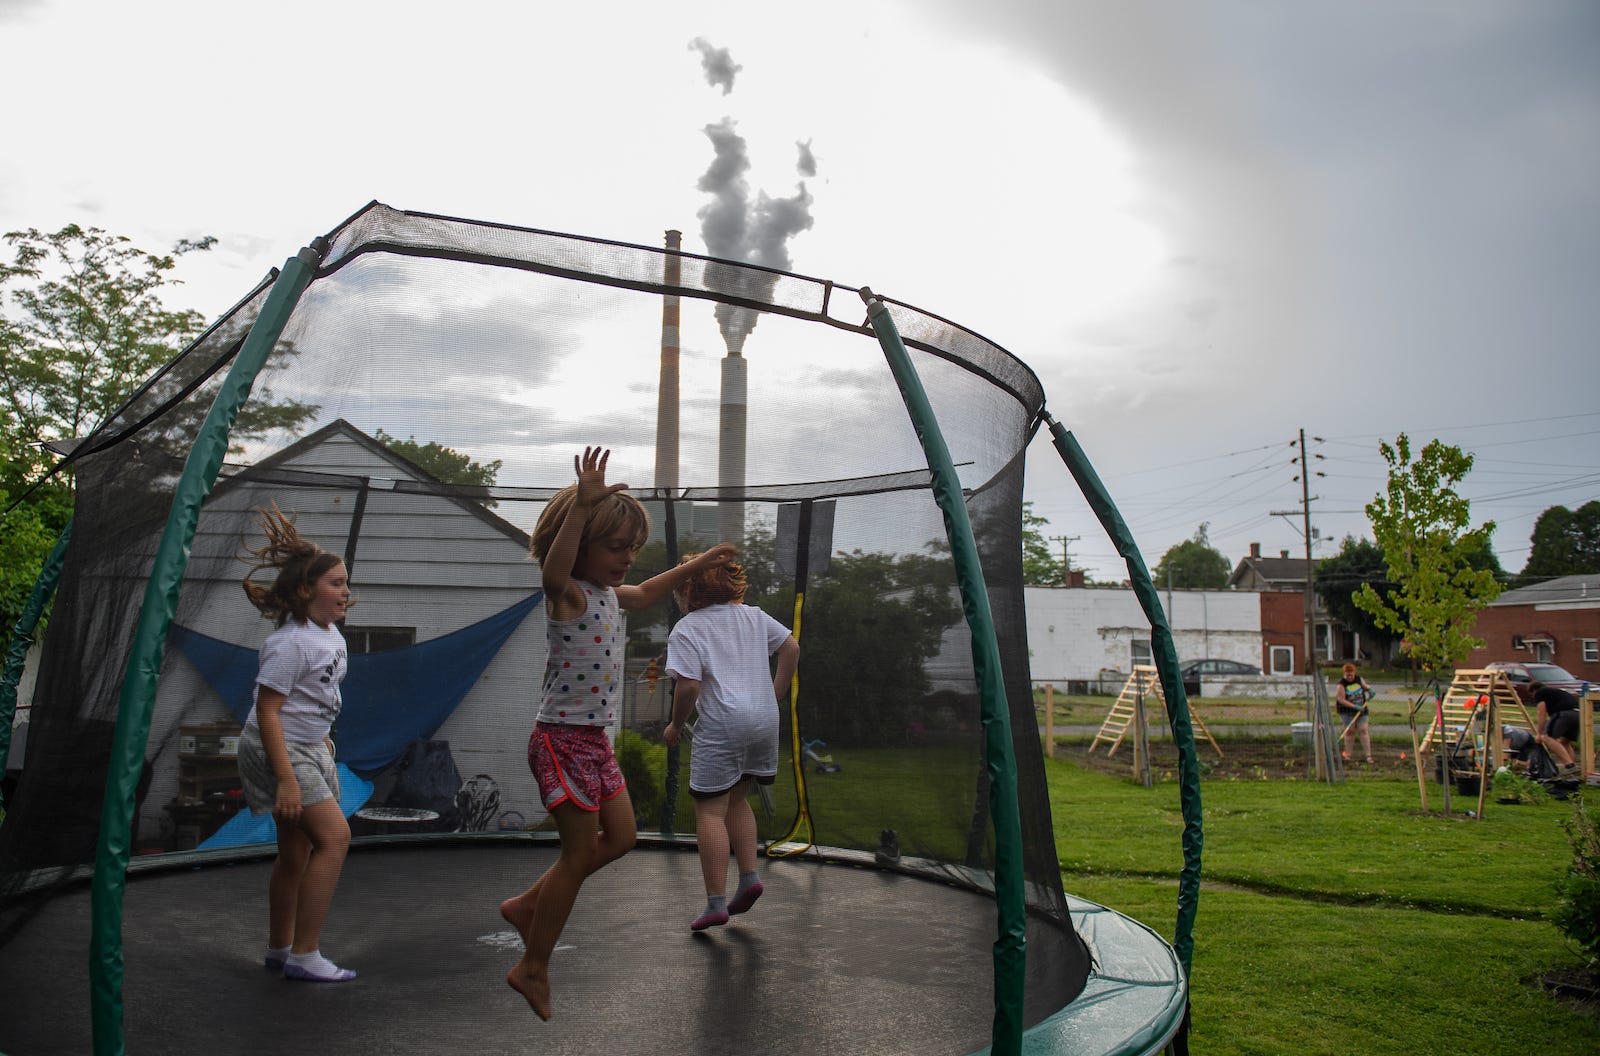 Three children jump on a trampoline outside on a cloudy day. Behind them is a white house and a tall smokestack emitting grey smoke.